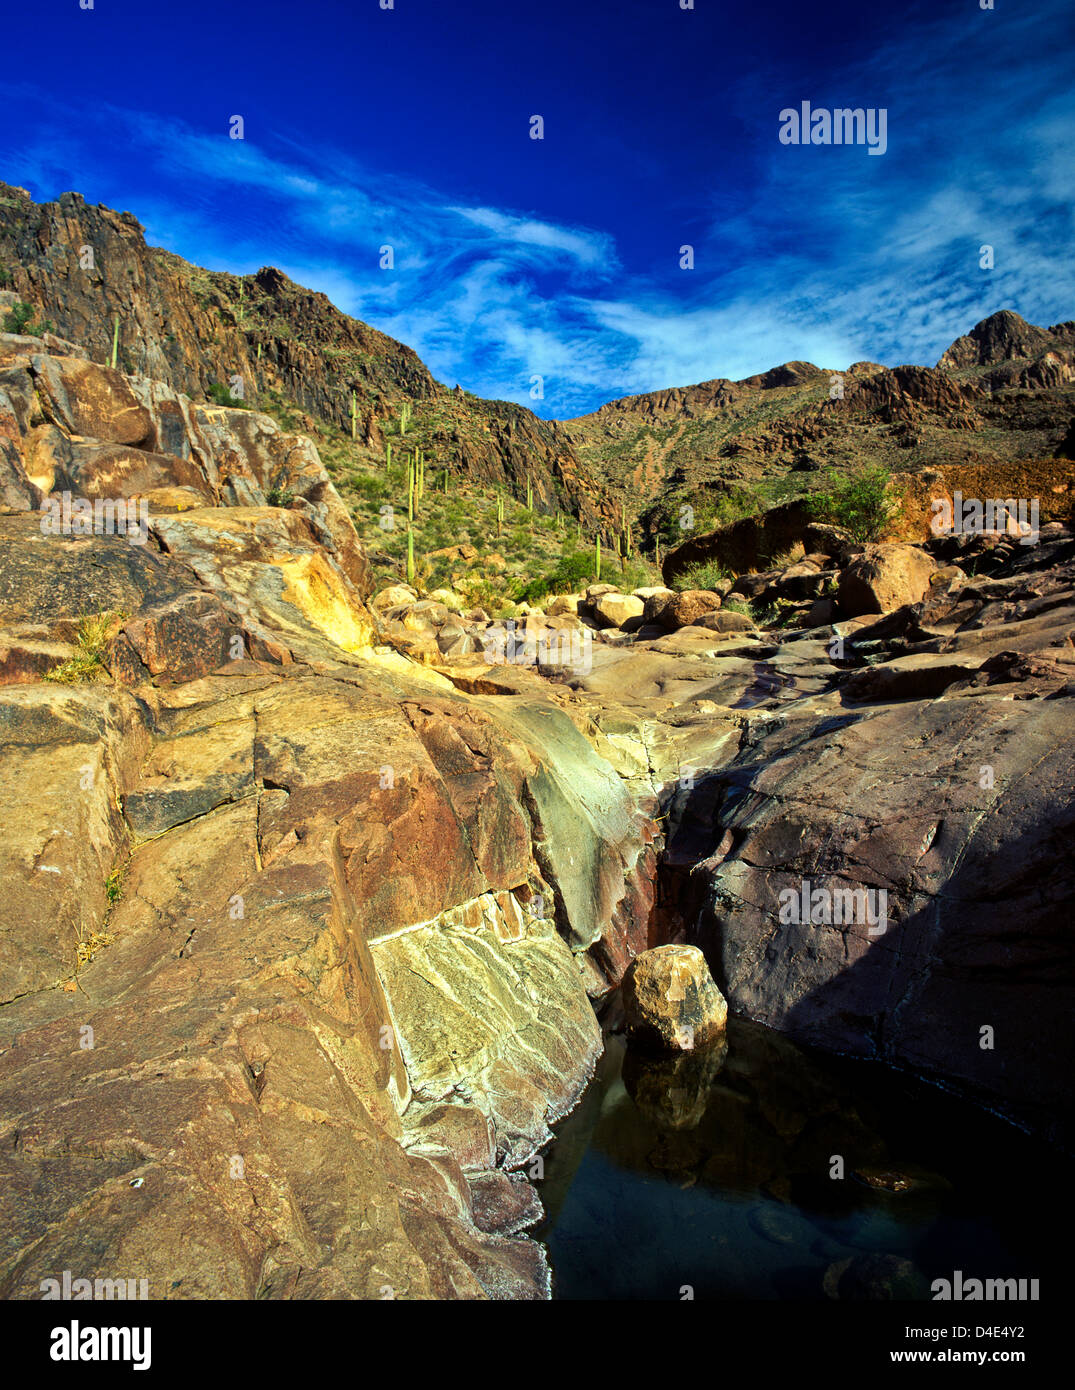 Native American Petroglyphs on stones near this pool of water, Superstition Mountains near Phoenix, AZ. Pinal County. USA Stock Photo